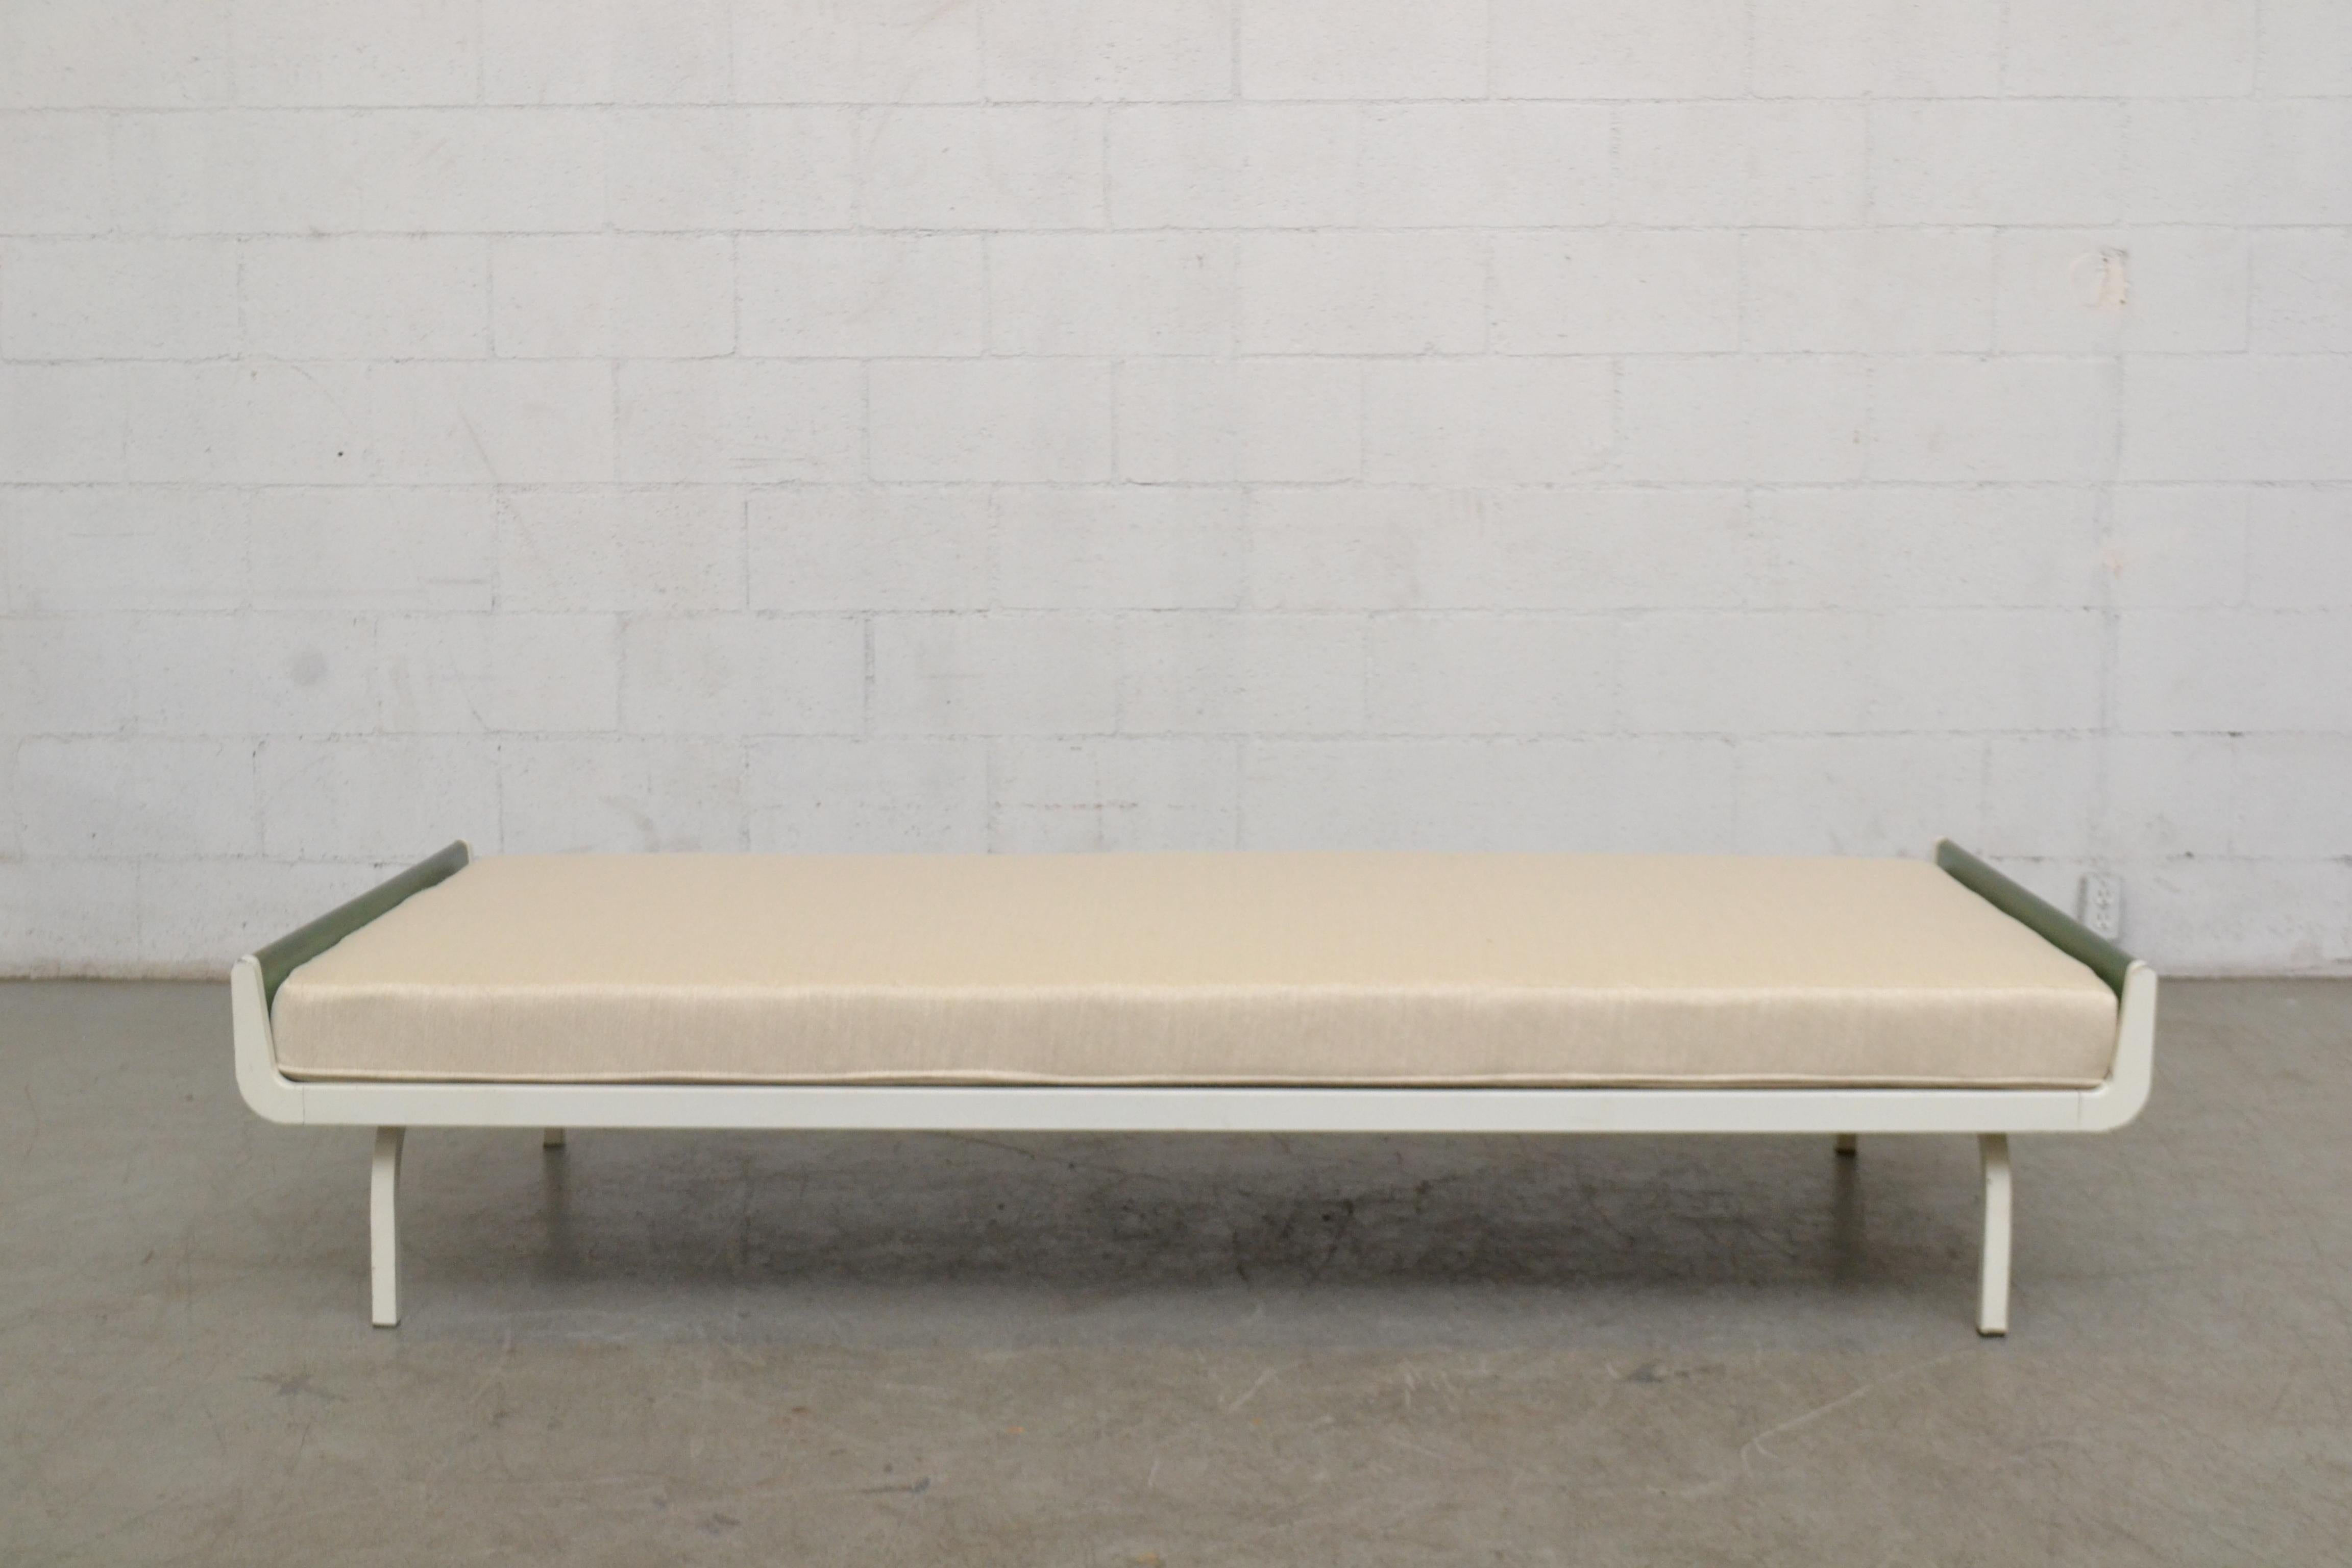 Midcentury daybed designed for Auping in the Netherlands. Green stained wood ends with white enameled metal frame. Newly upholstered cushion in bone white fabric. Frame has visible wear consistent with its age and usage.